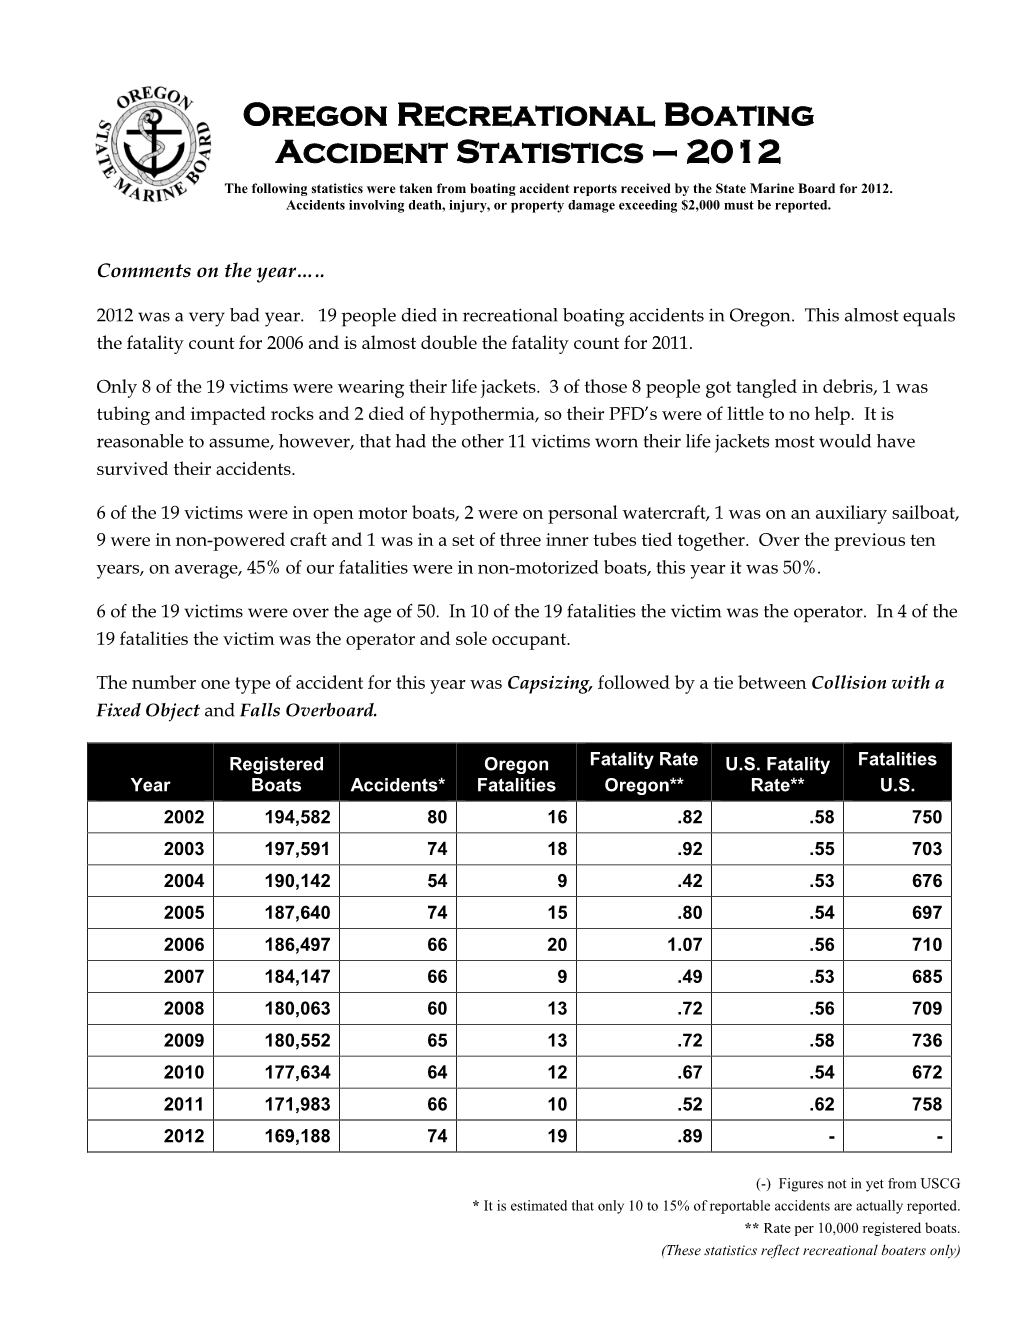 Oregon Recreational Boating Accident Statistics – 2012 the Following Statistics Were Taken from Boating Accident Reports Received by the State Marine Board for 2012